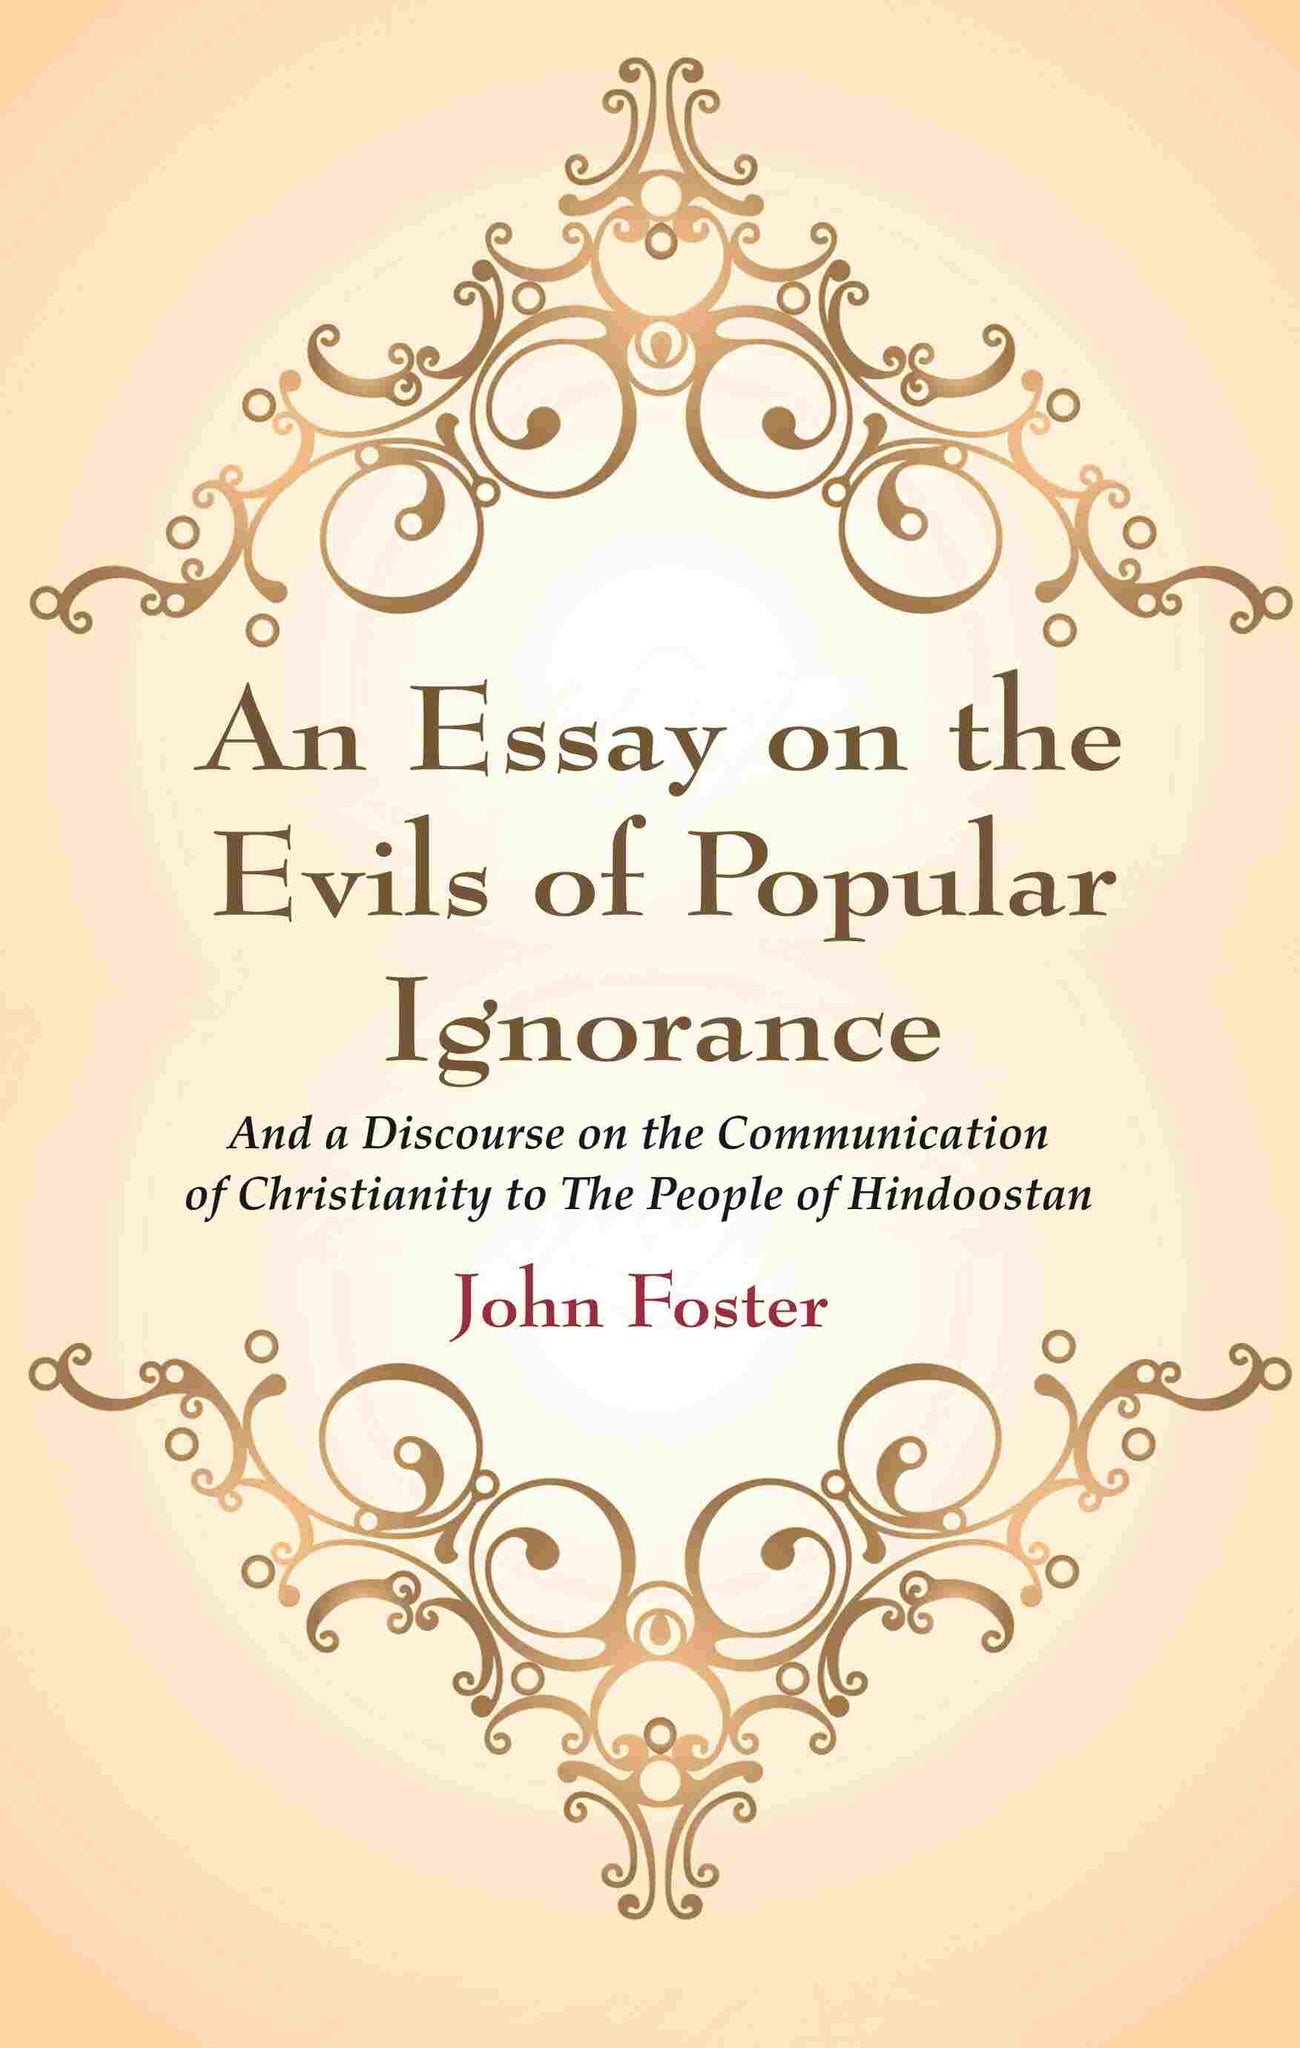 An Essay on the Evils of Popular Ignorance: And a Discourse on the Communication of Christianity to The People of Hindoostan